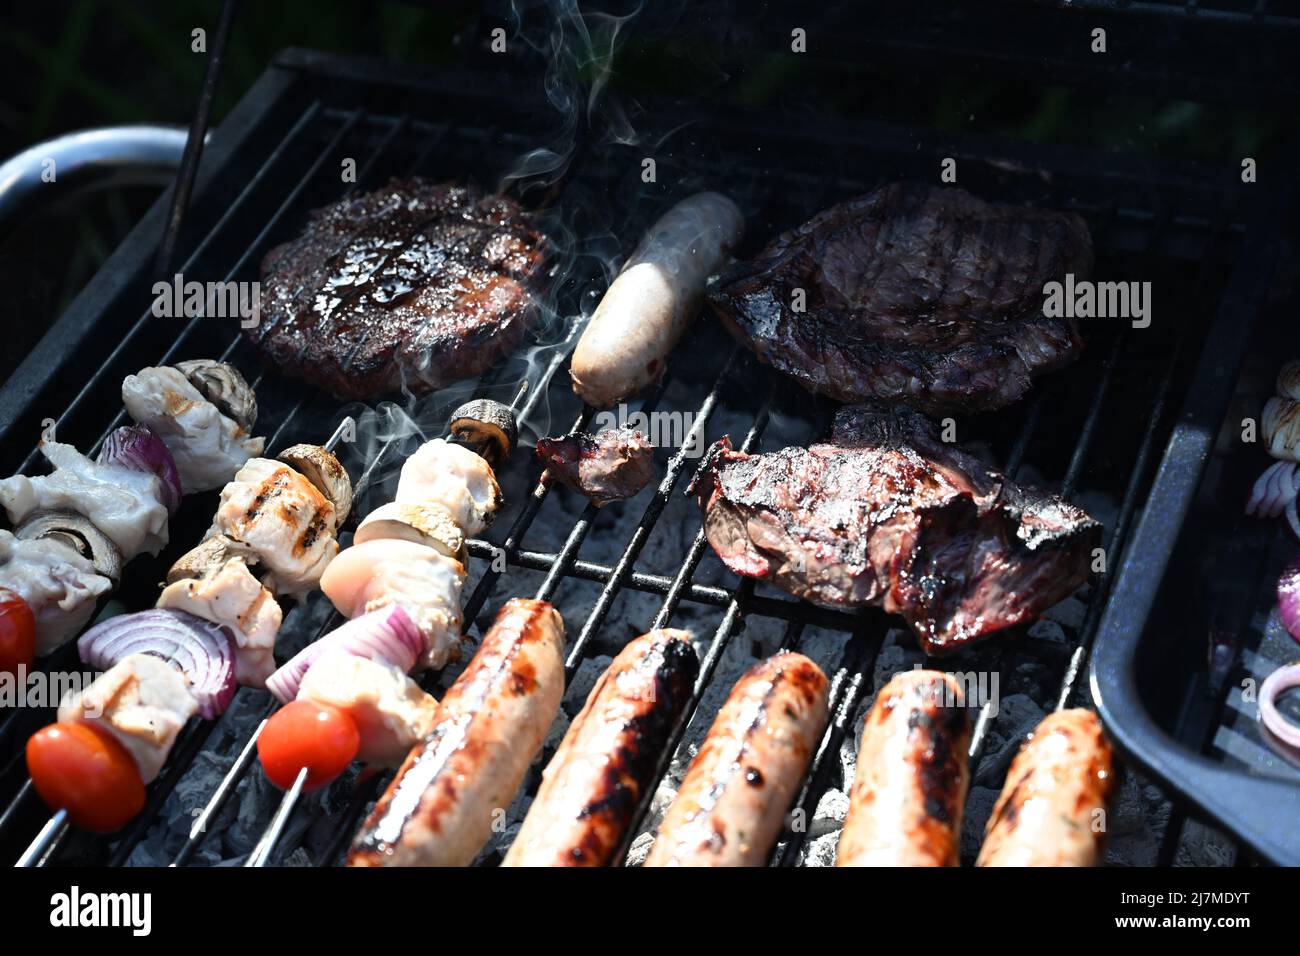 meat cooking on the barbecue Grill, outdoor living, garden party Stock Photo